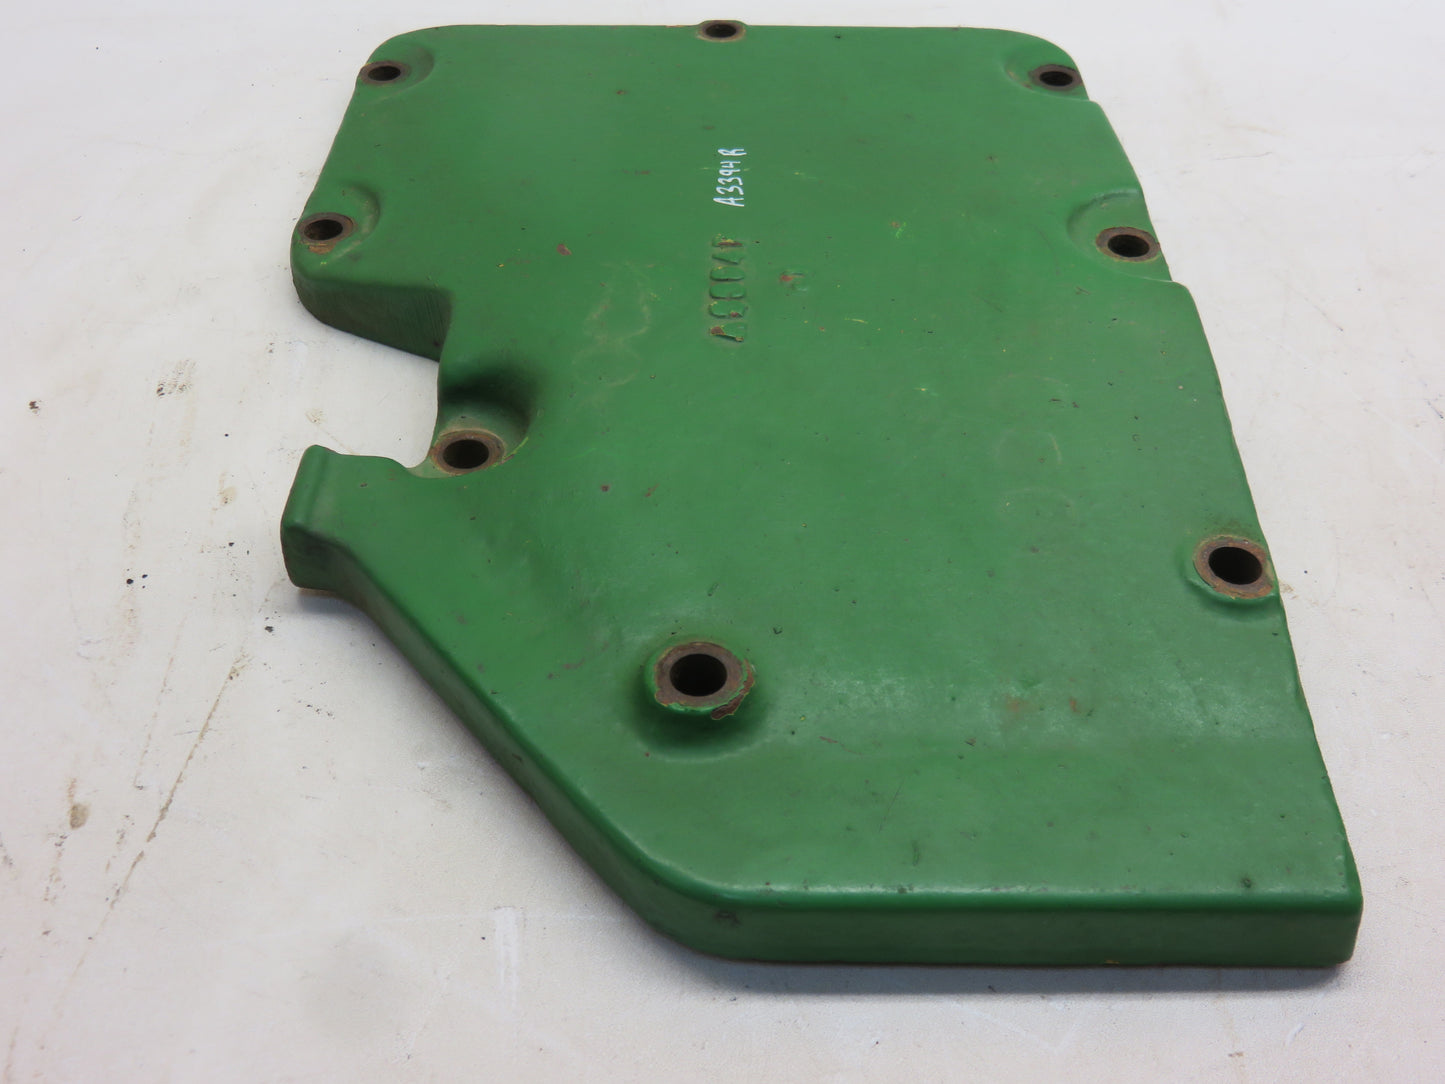 A3394R John Deere Crankcase Cover For A